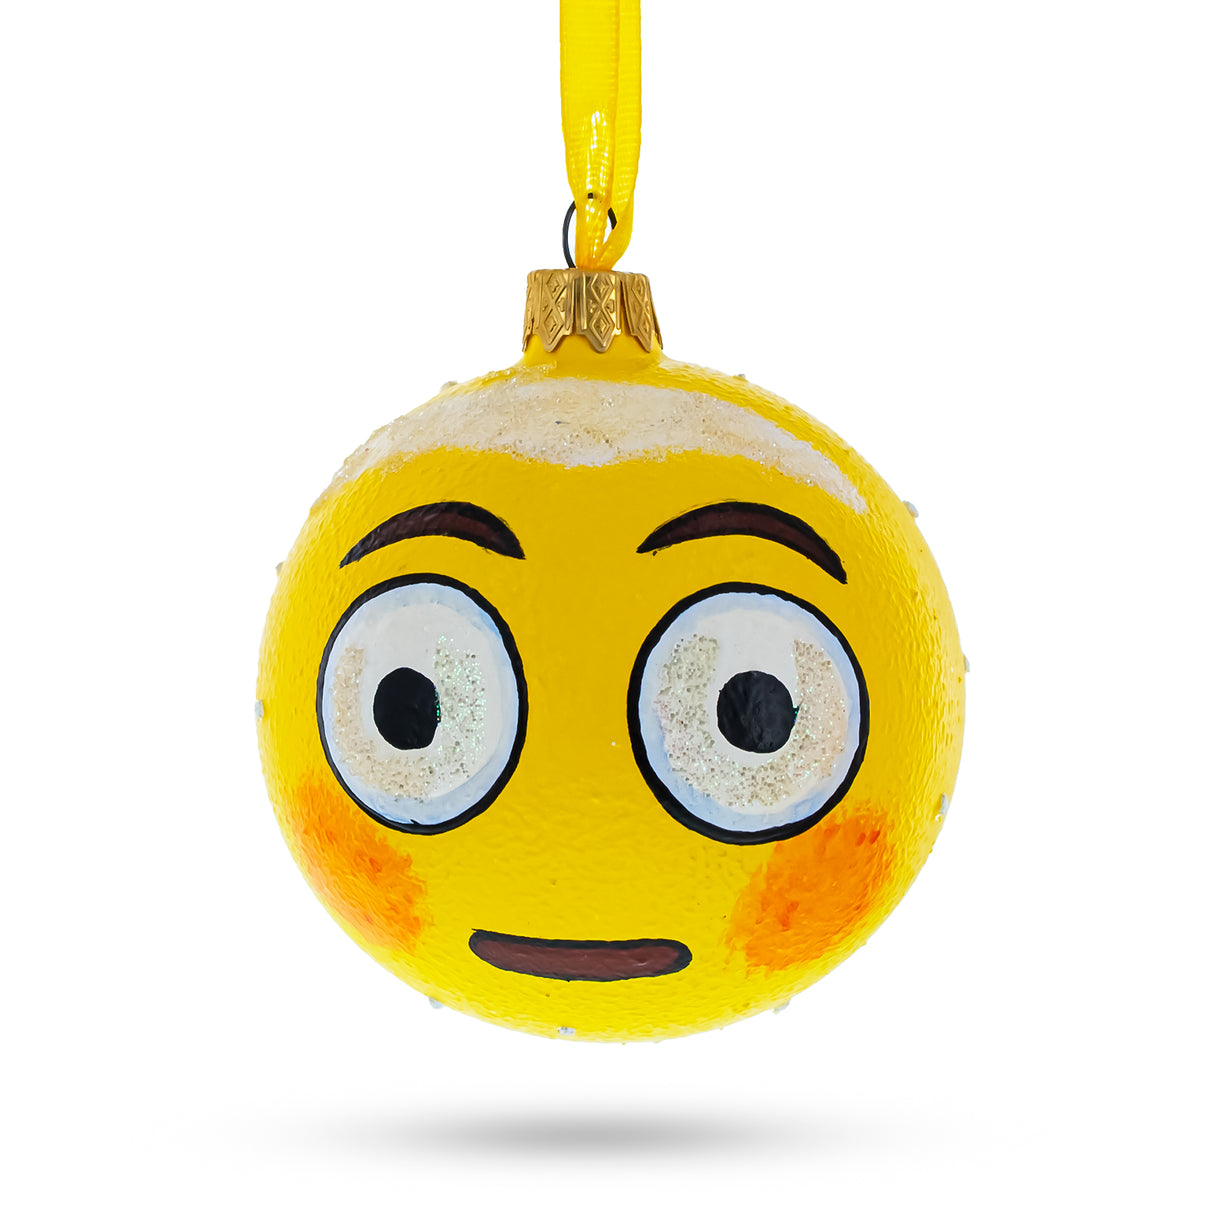 Expressive Eye Roll: Rolling Eyes Facial Expressions Blown Glass Ball Christmas Ornament 3.25 Inches in Yellow color, Round shape